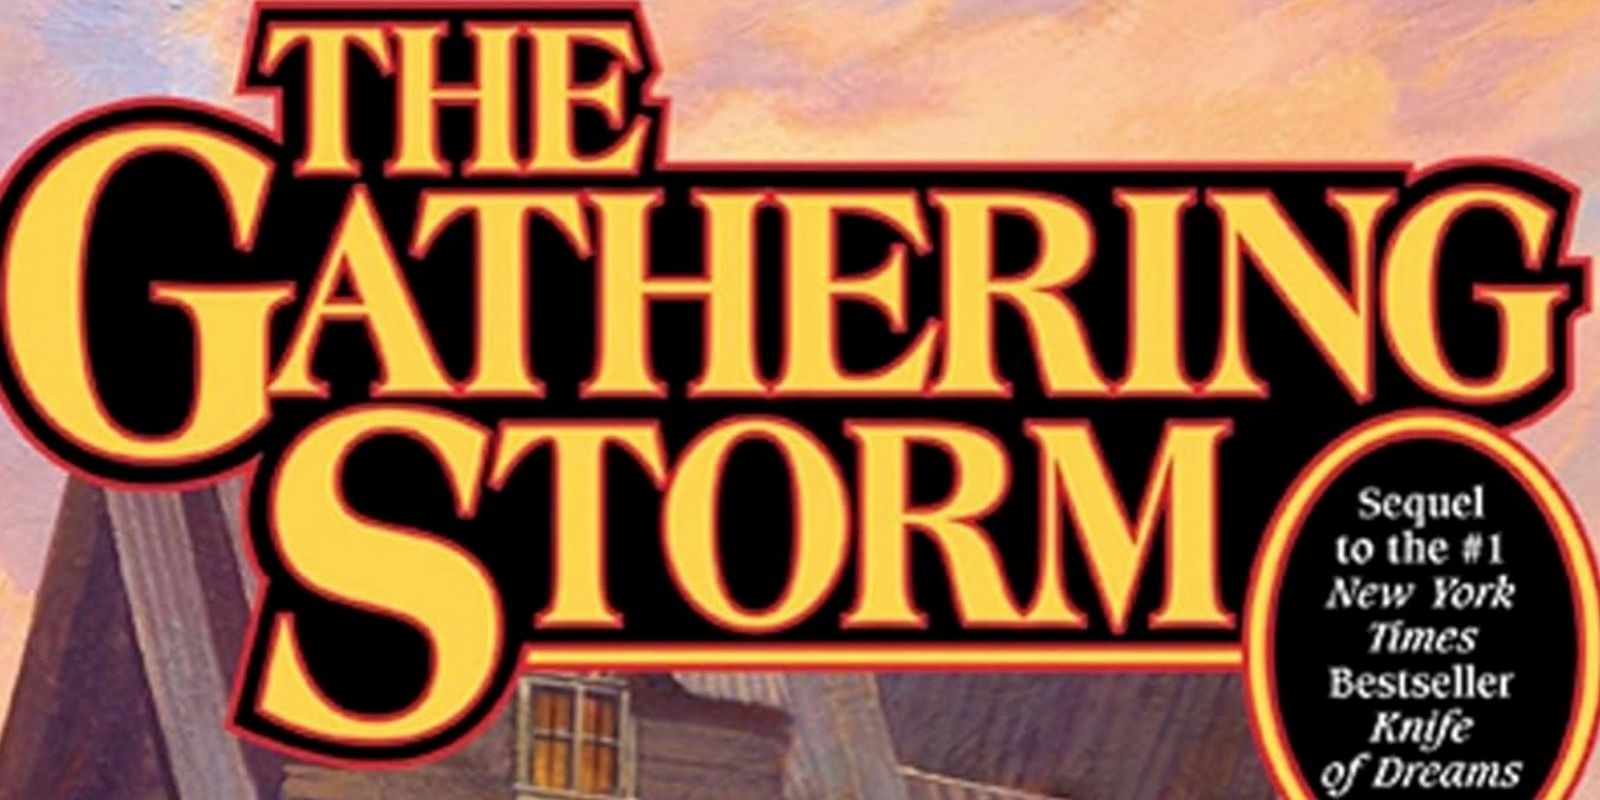 The cover of The Gathering Storm by Robert Jordan and Brandon Sanderson.